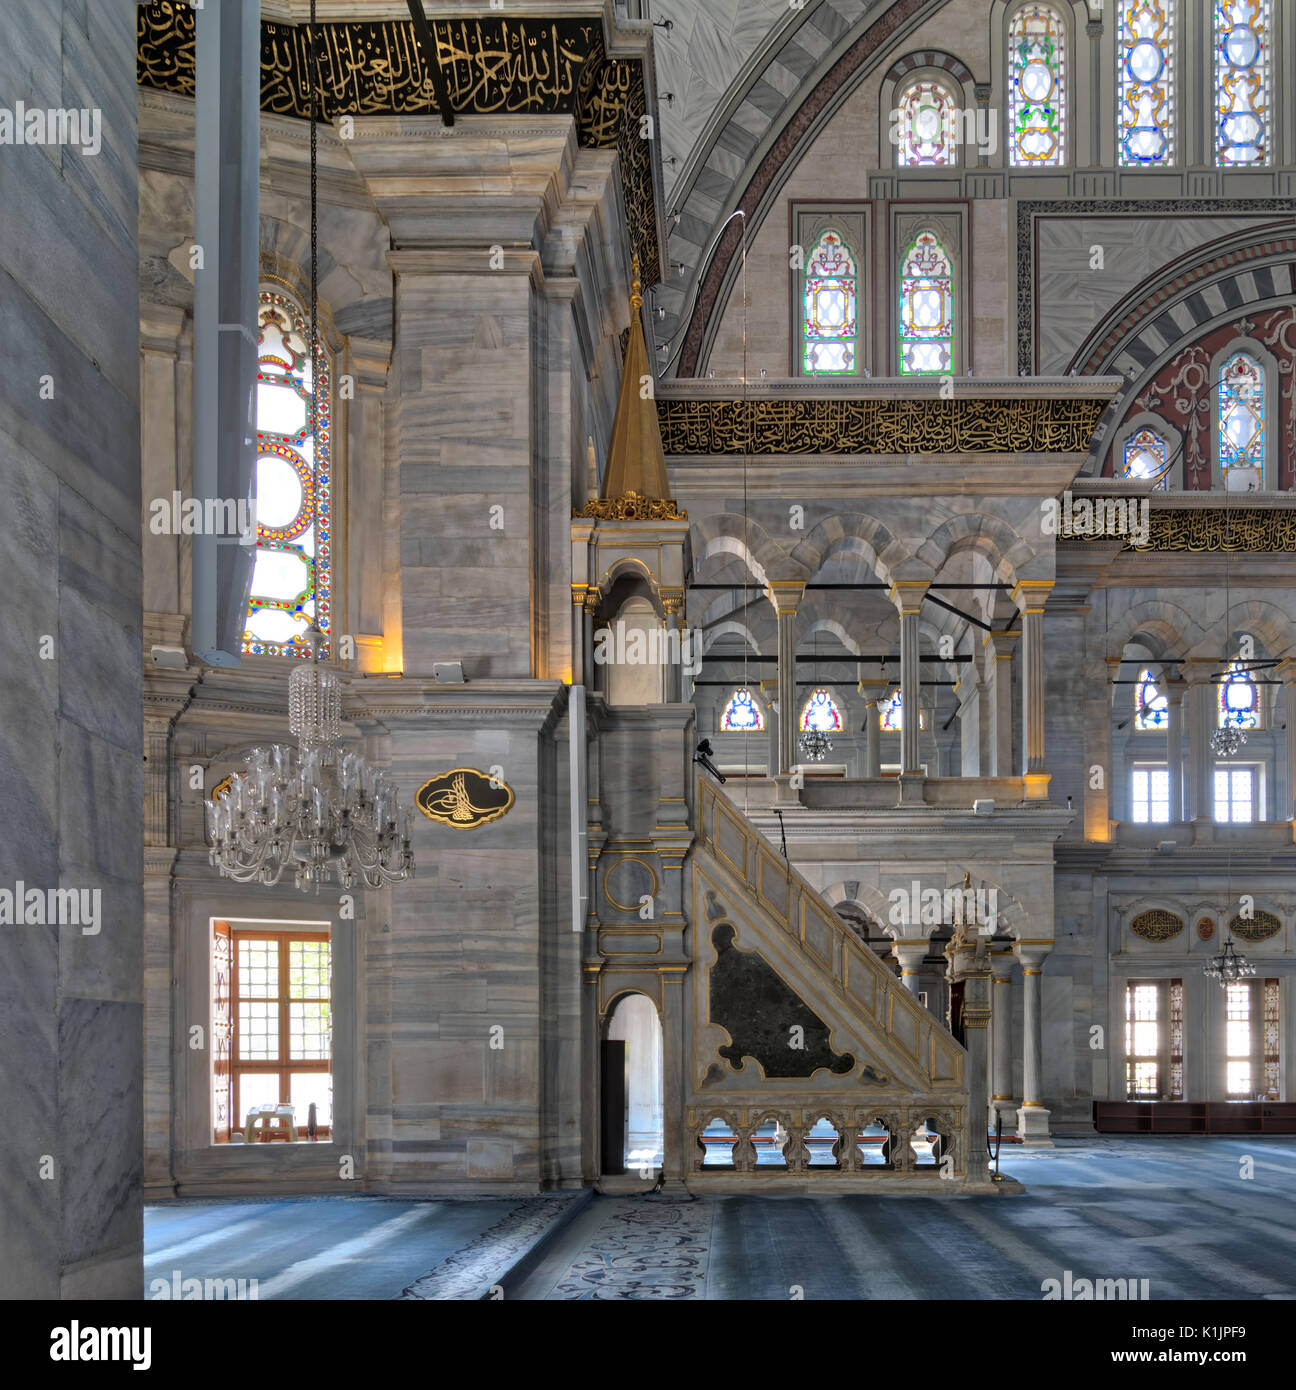 Interior shot of Nuruosmaniye Mosque, an Ottoman Baroque style mosque with minbar (platform), arches & colored stained glass windows located in Shembe Stock Photo